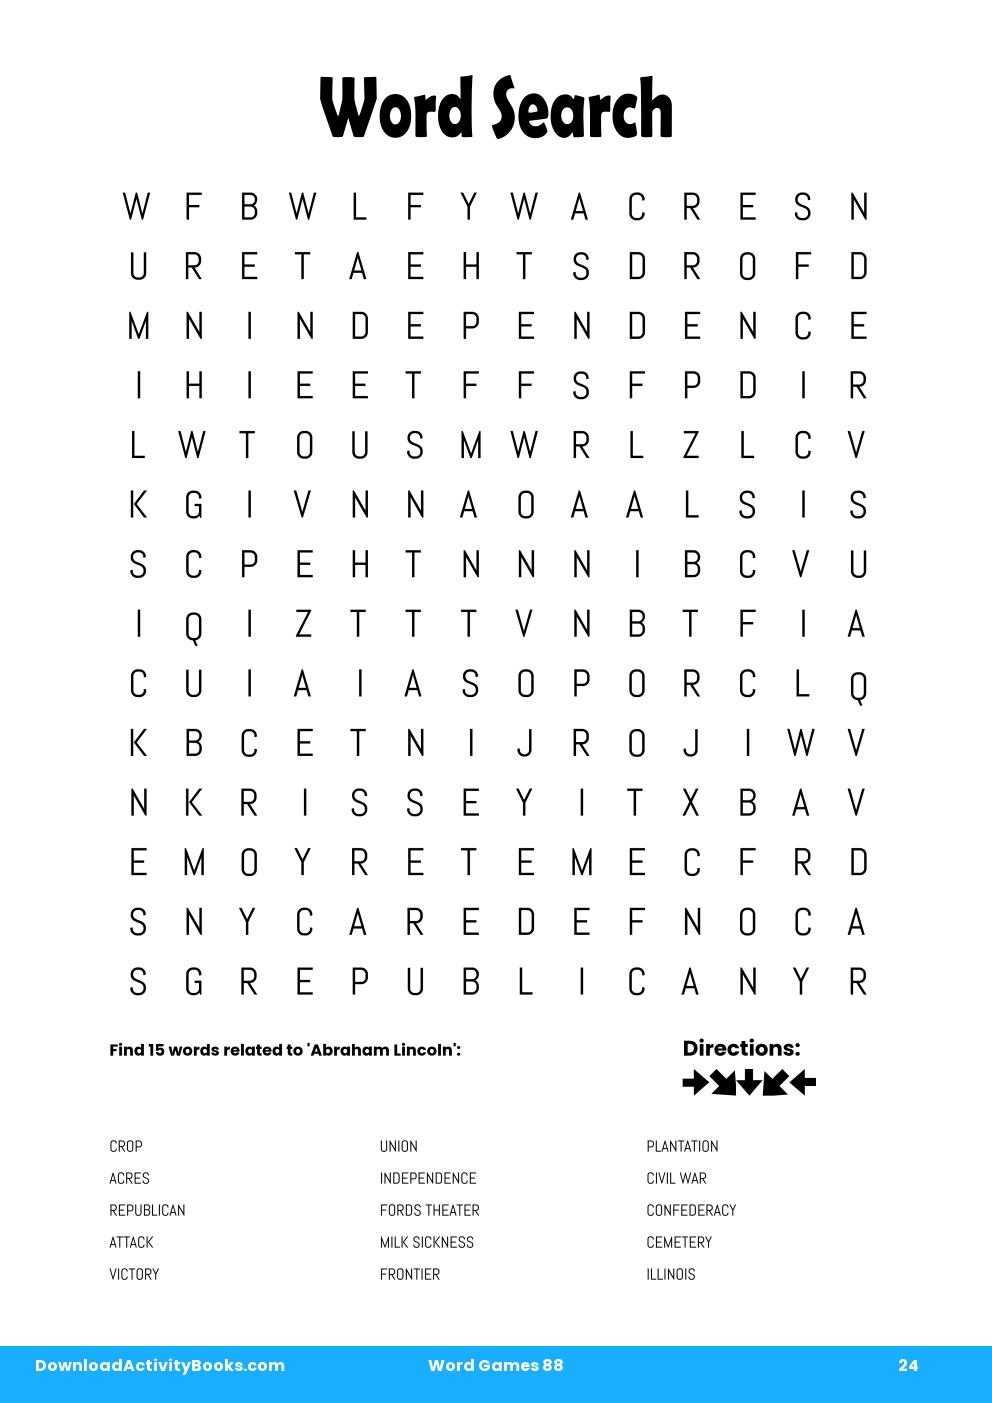 Word Search in Word Games 88